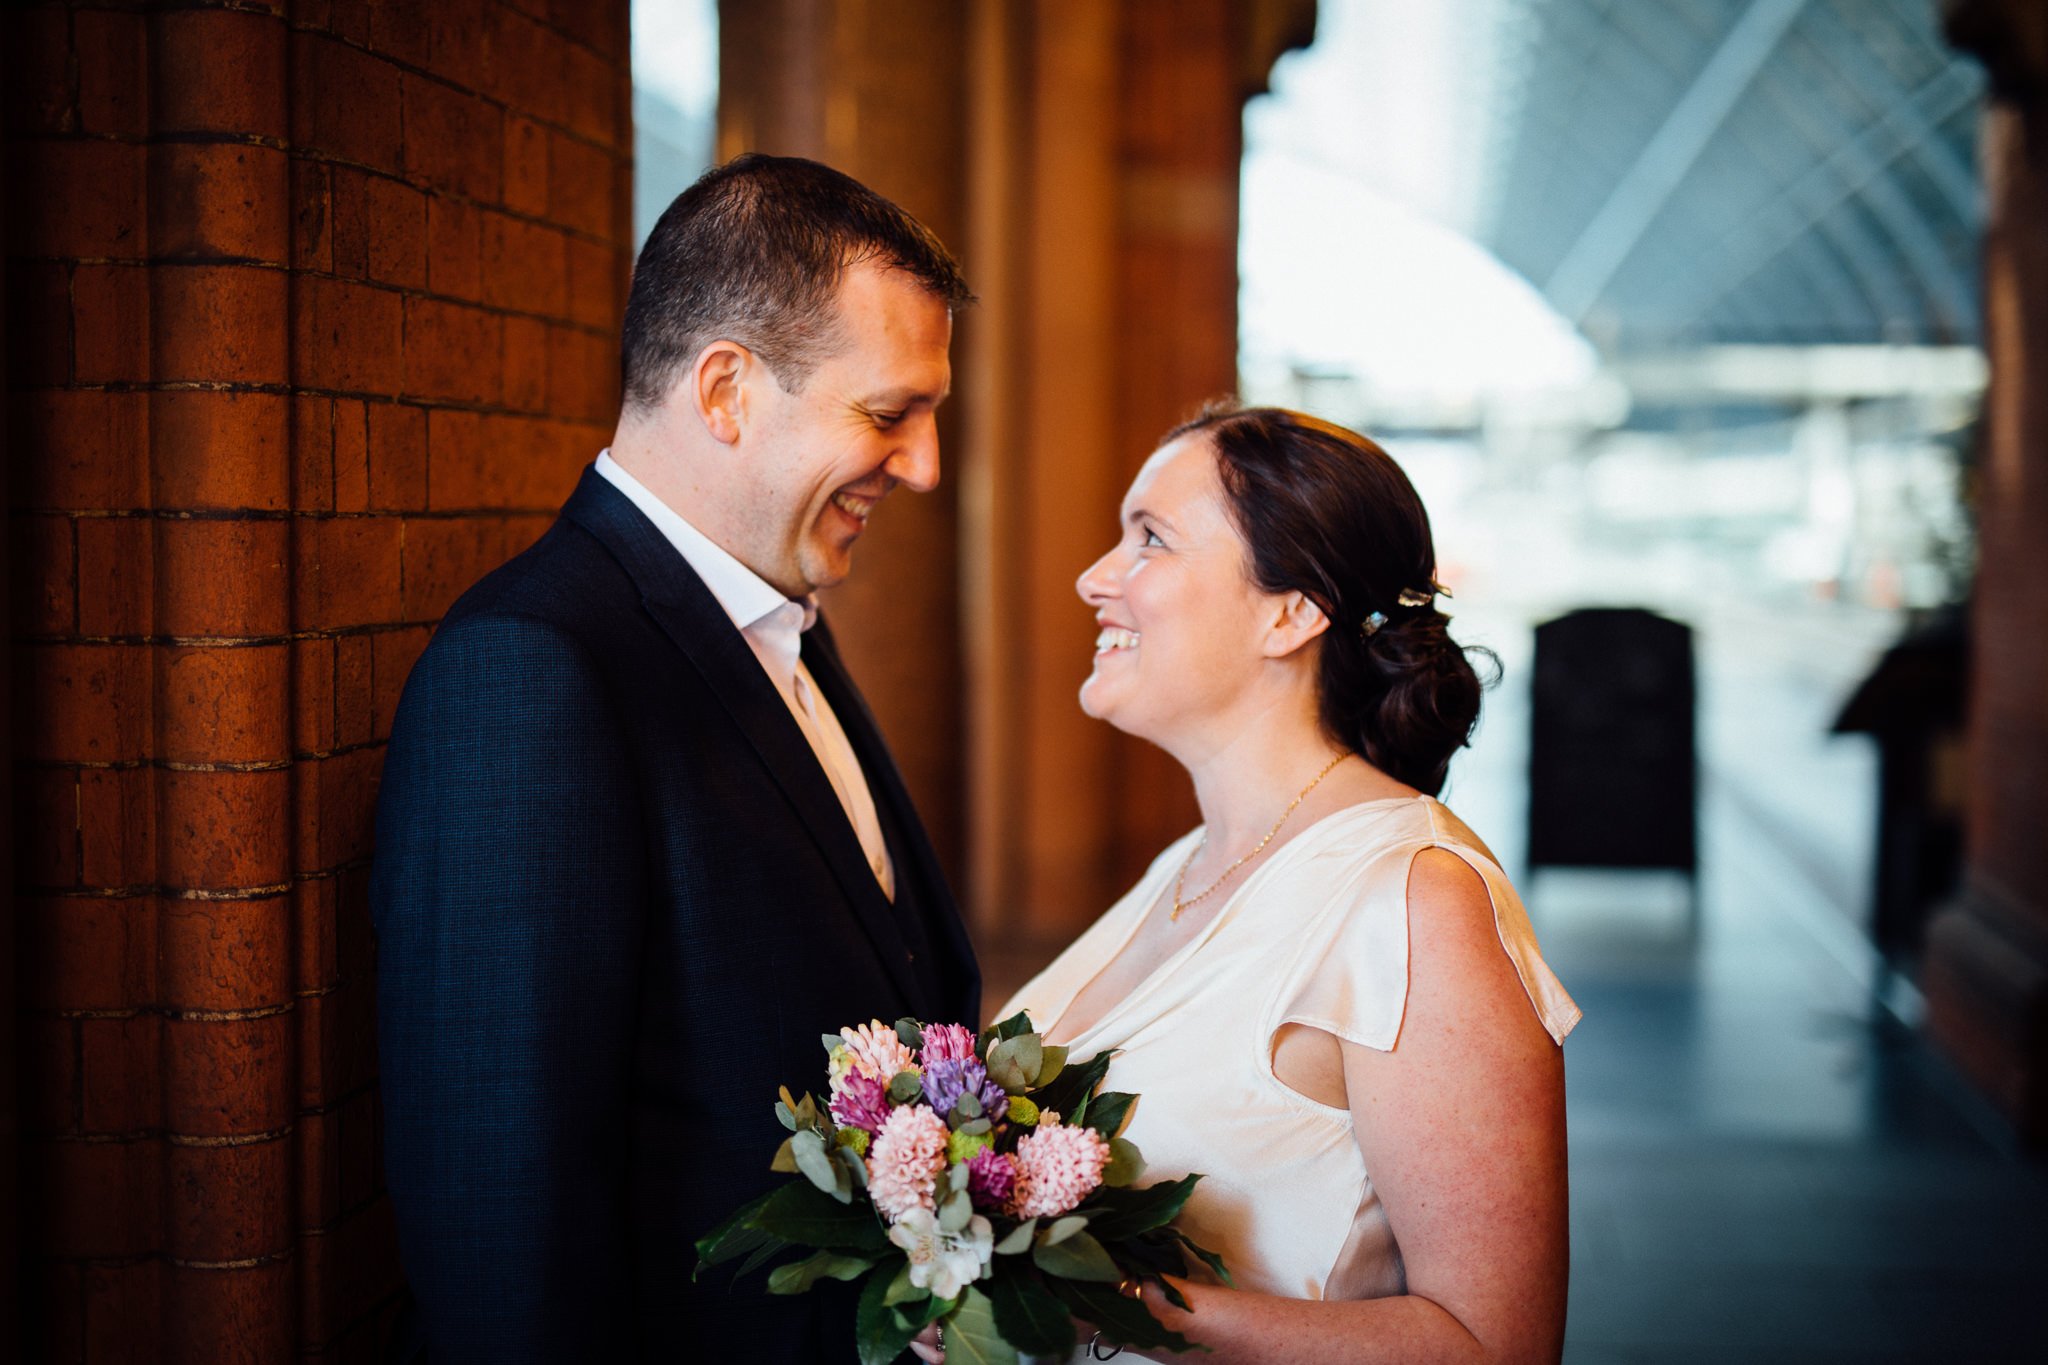  Bride and Groom smiling at each other in St Pancras  